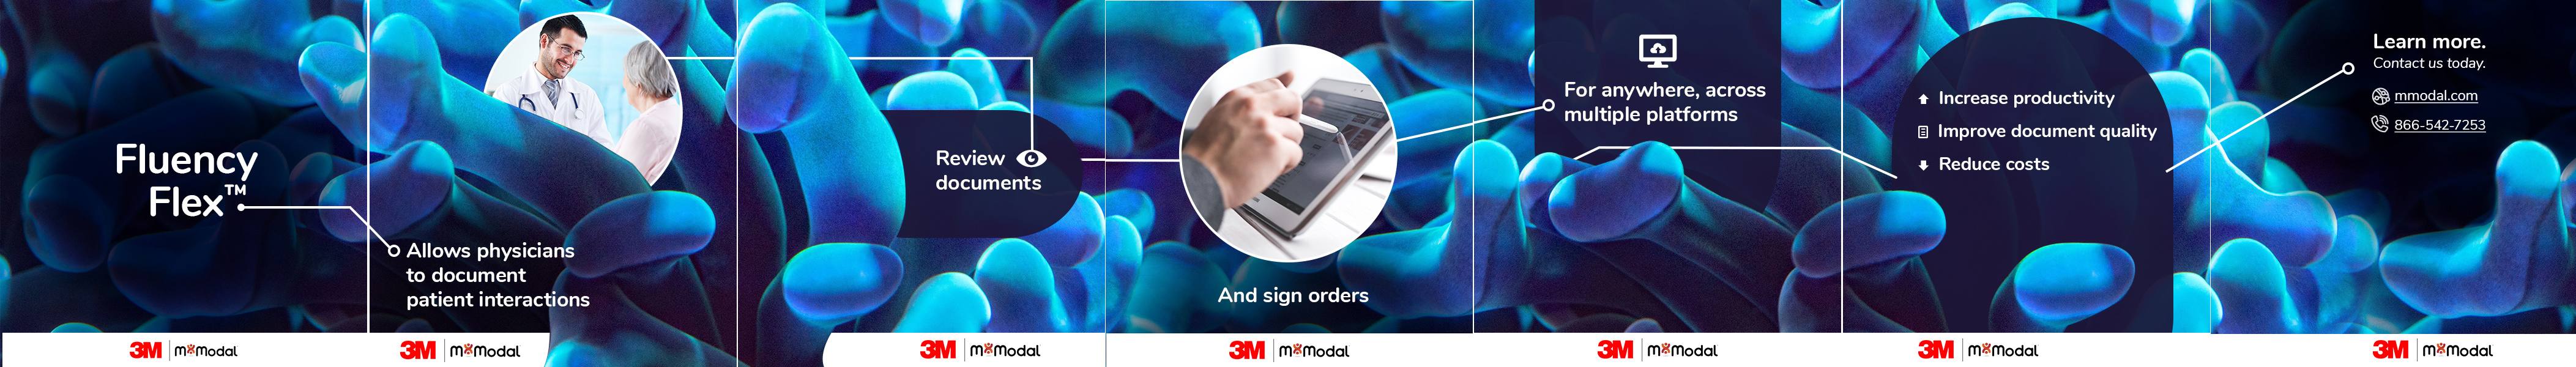 Carousel ad for 3M company MModal was designed by Oneupweb